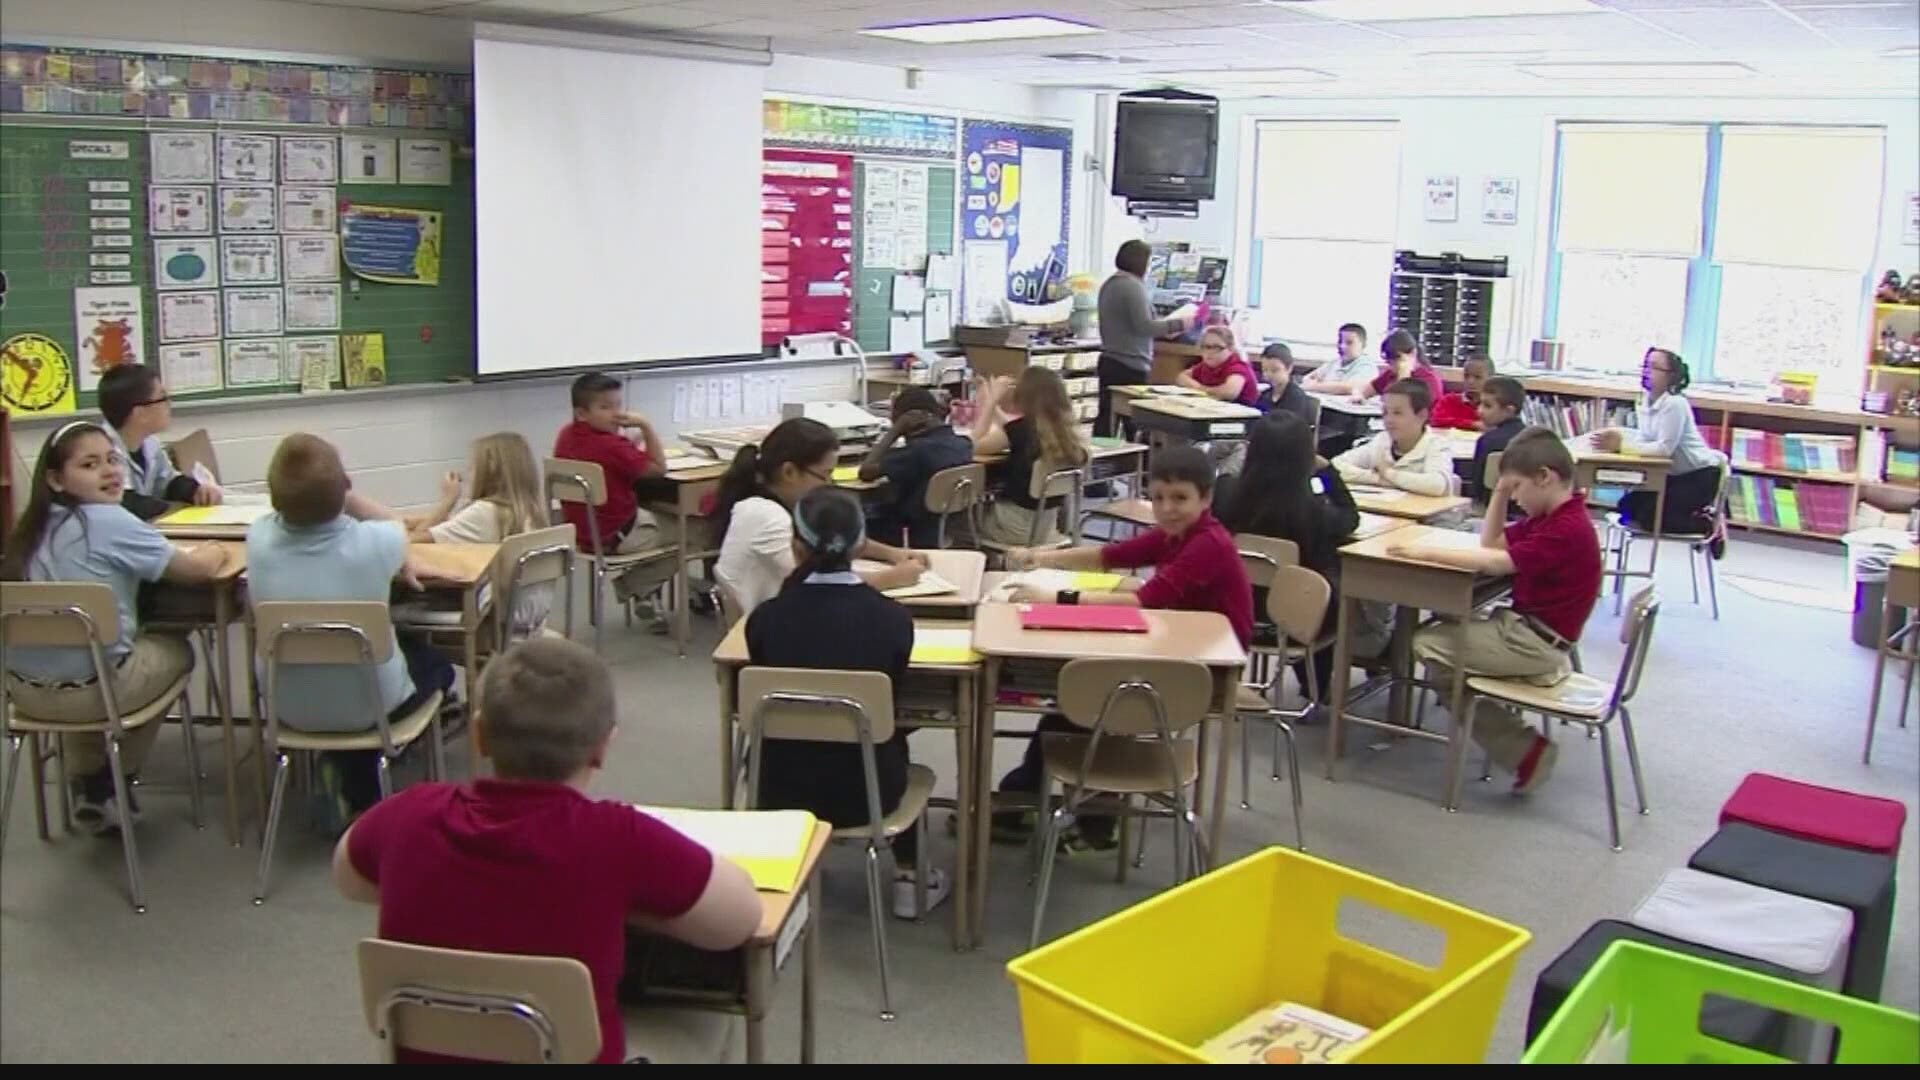 Two school districts in Indianapolis are planning to bring their students back into the classroom sooner than expected.